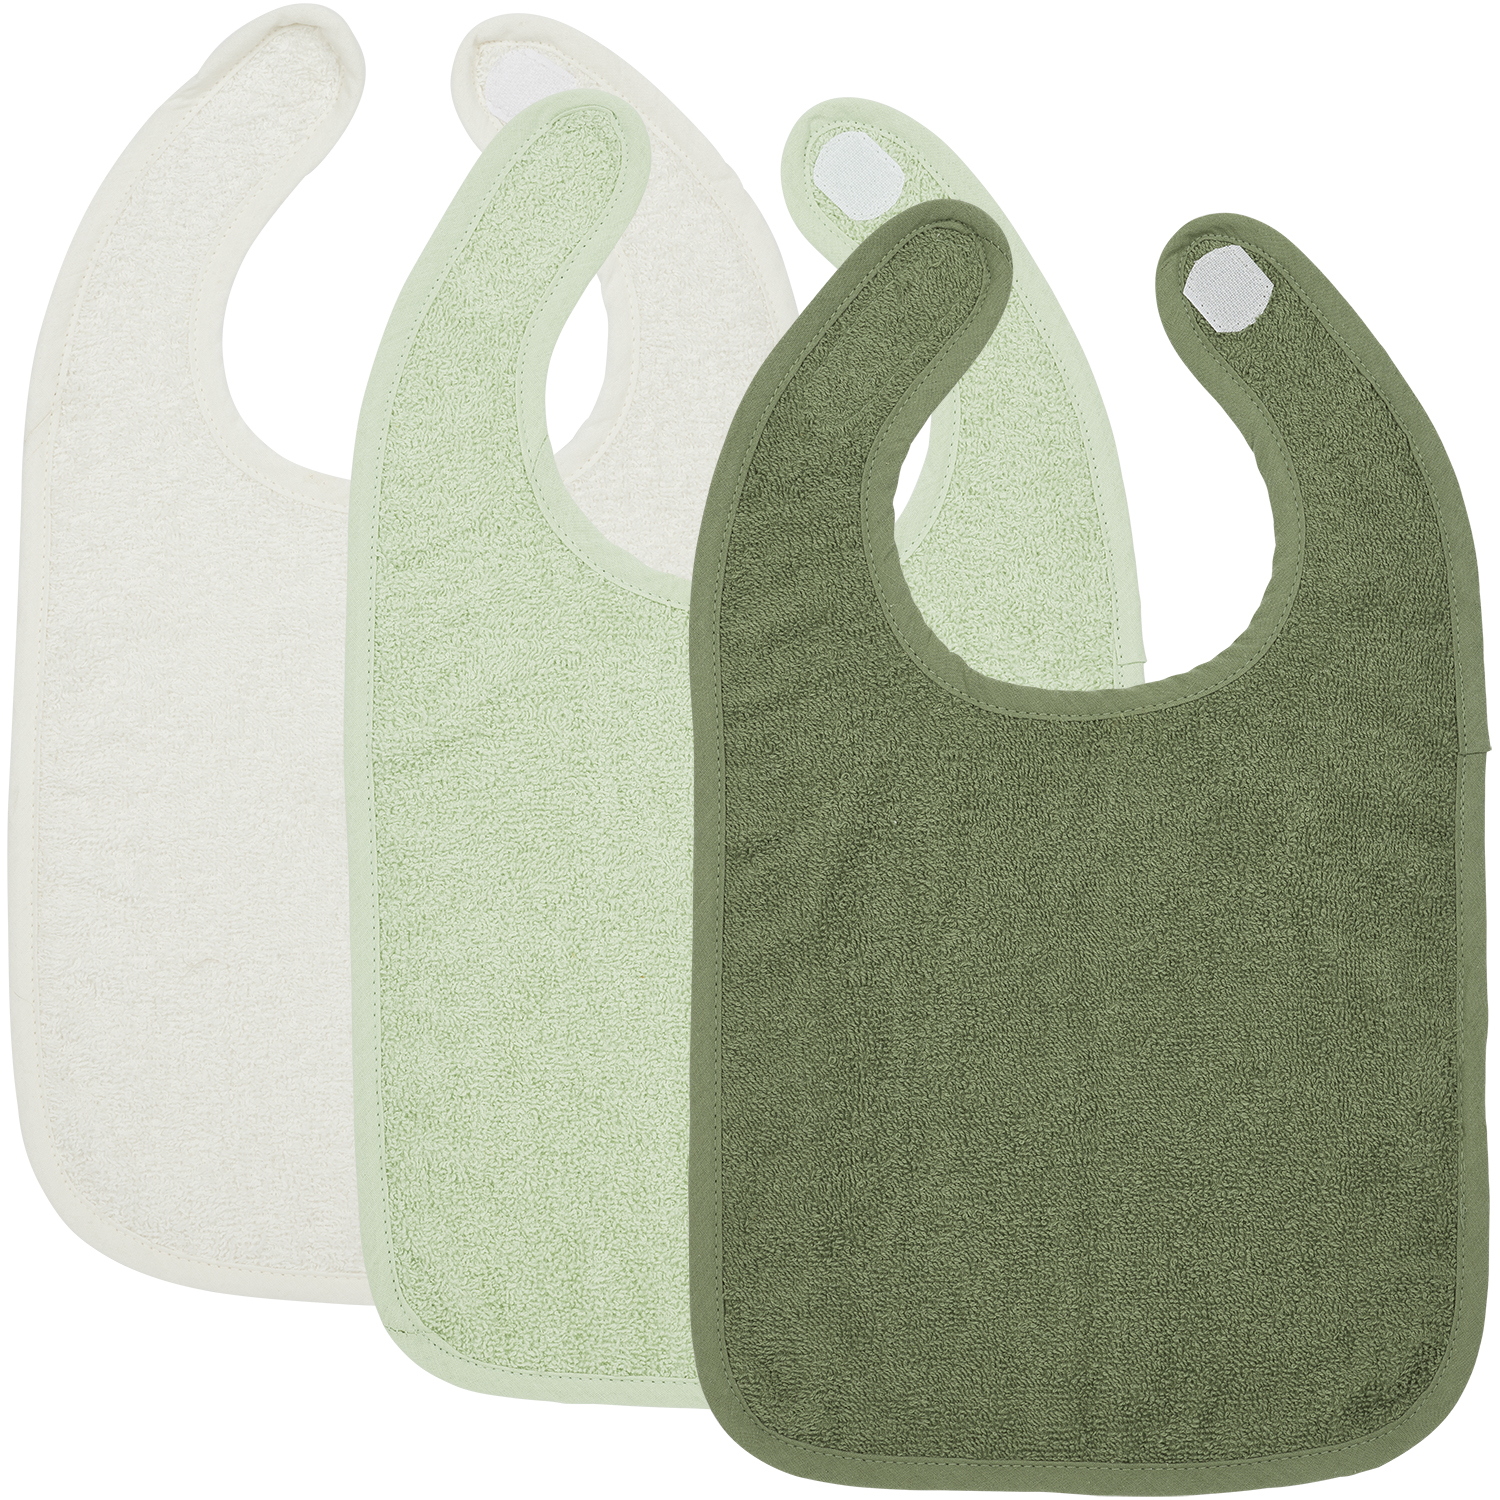 Bib 3-pack terry Uni - offwhite/soft green/forest green